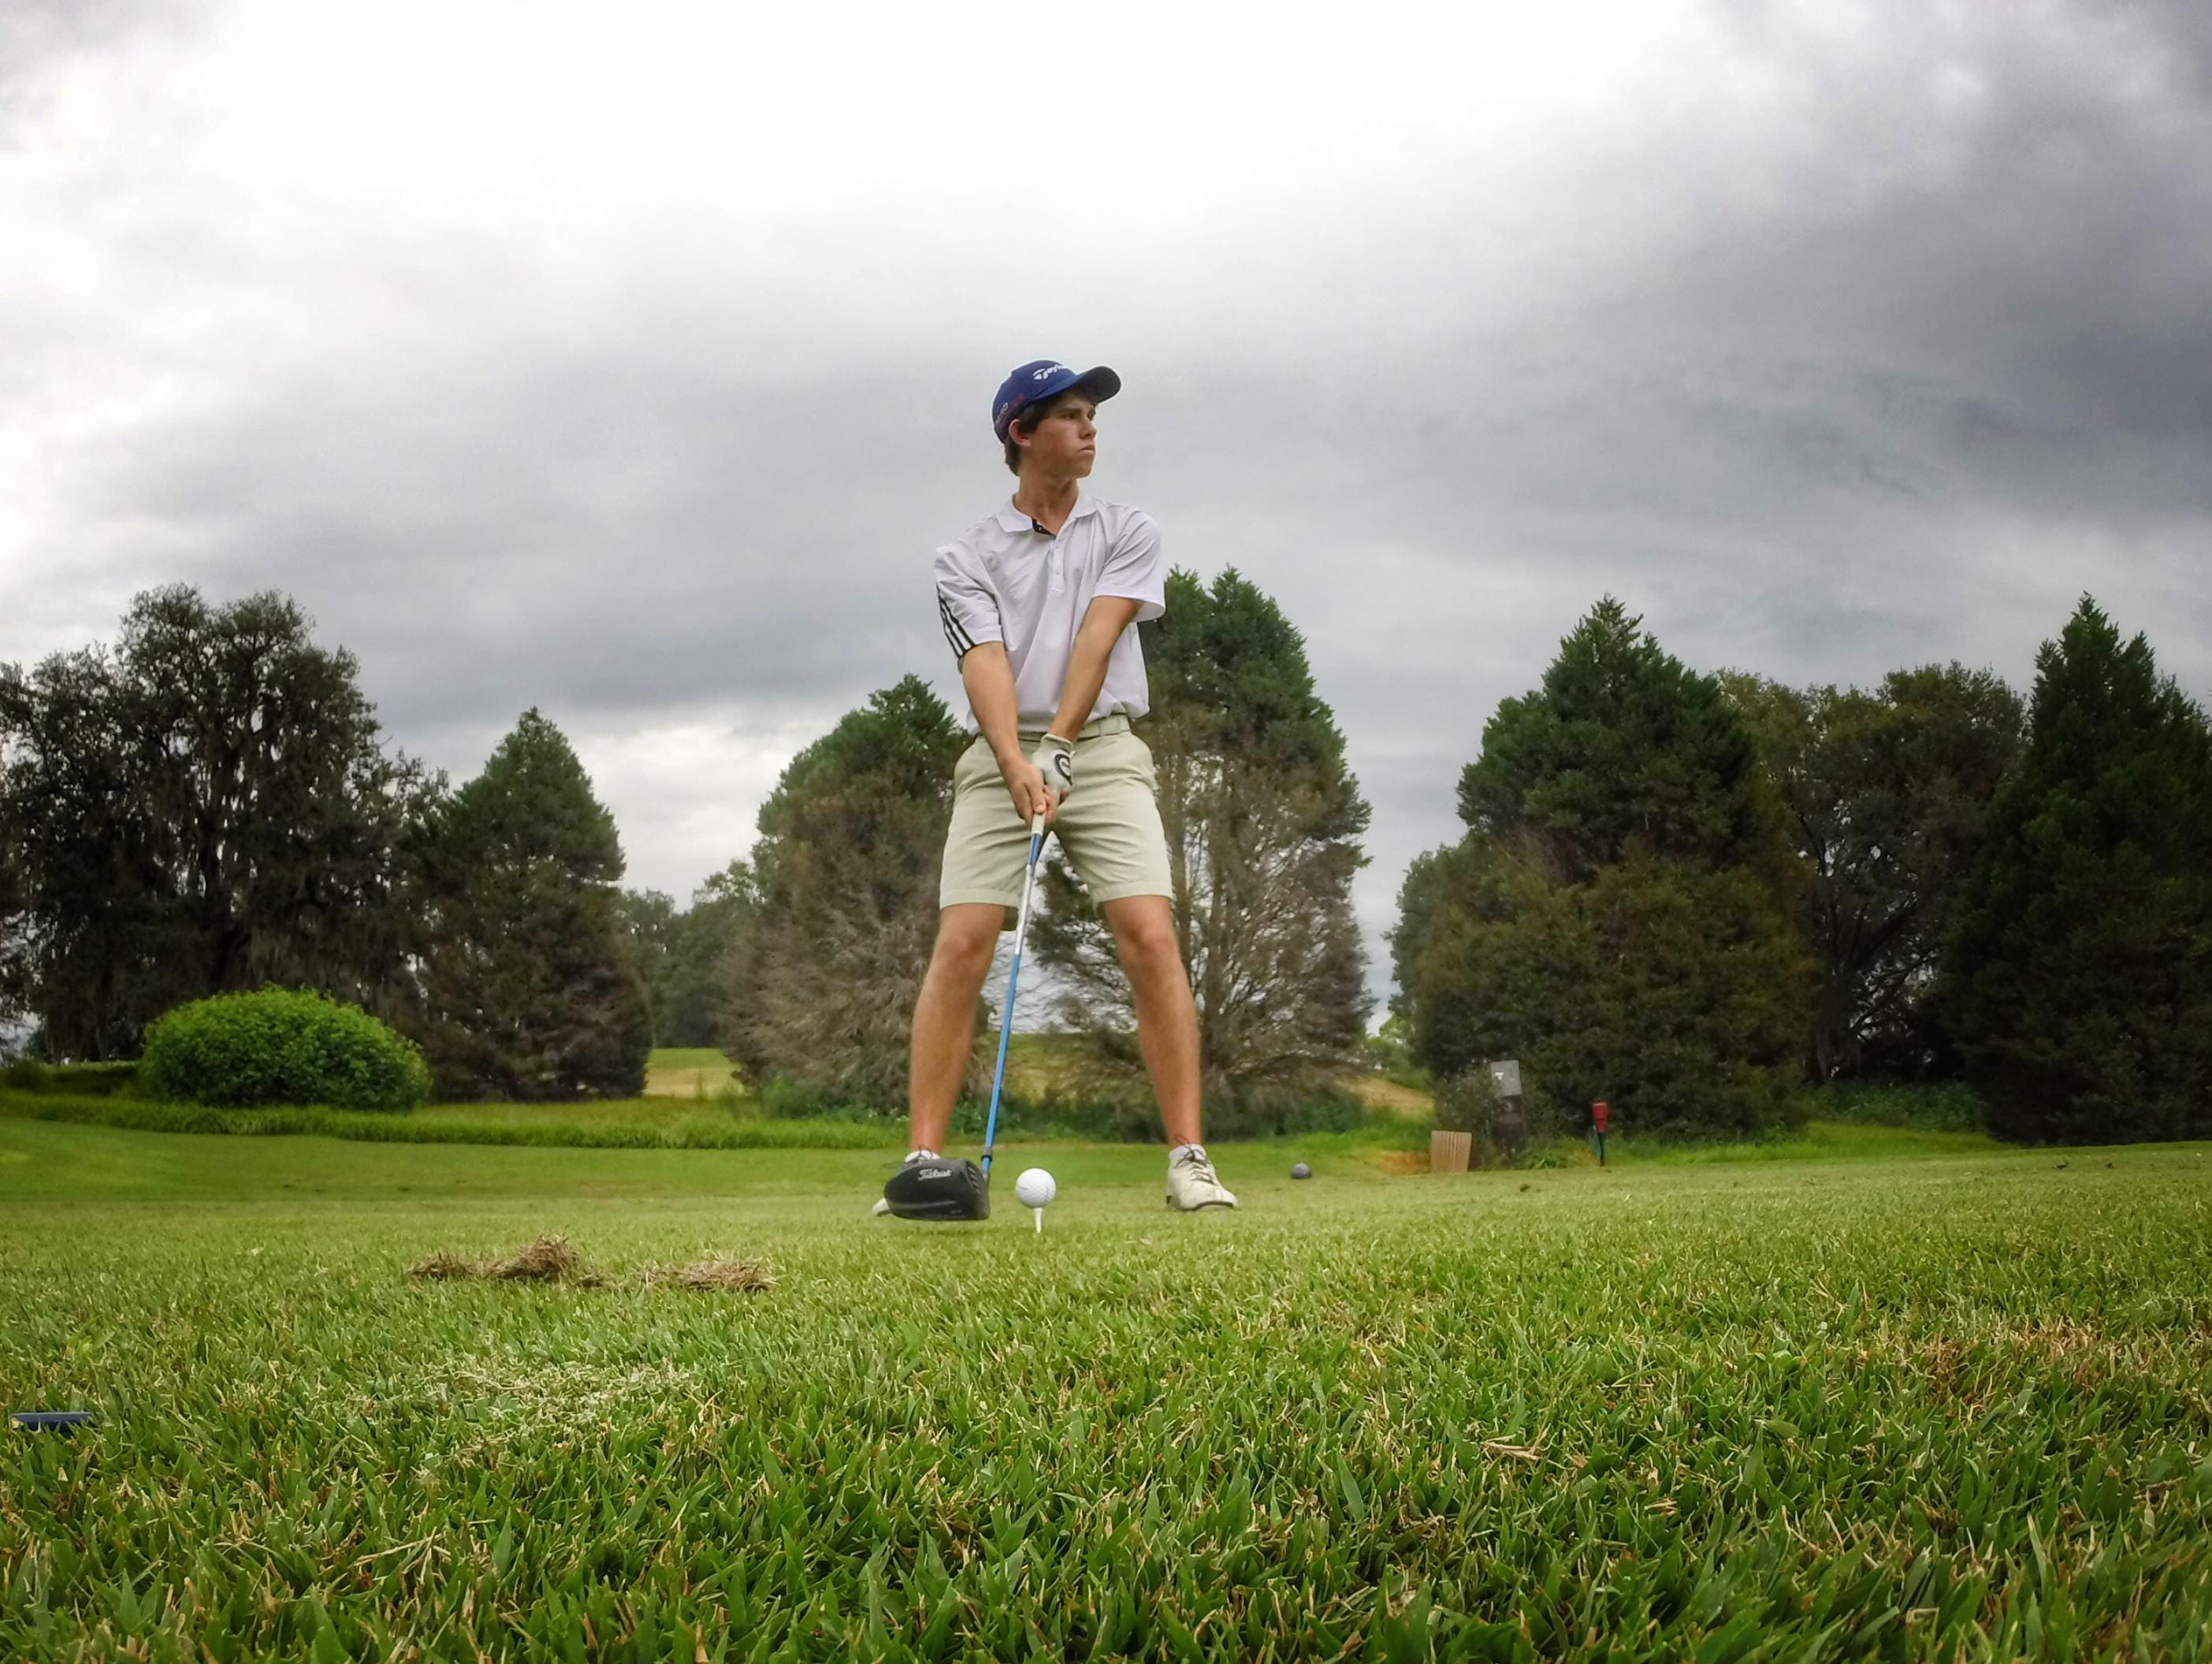 Maclay sophomore Bryson Bianco eyeballs his tee shot with driver during a round at Seminole Golf Course last week.